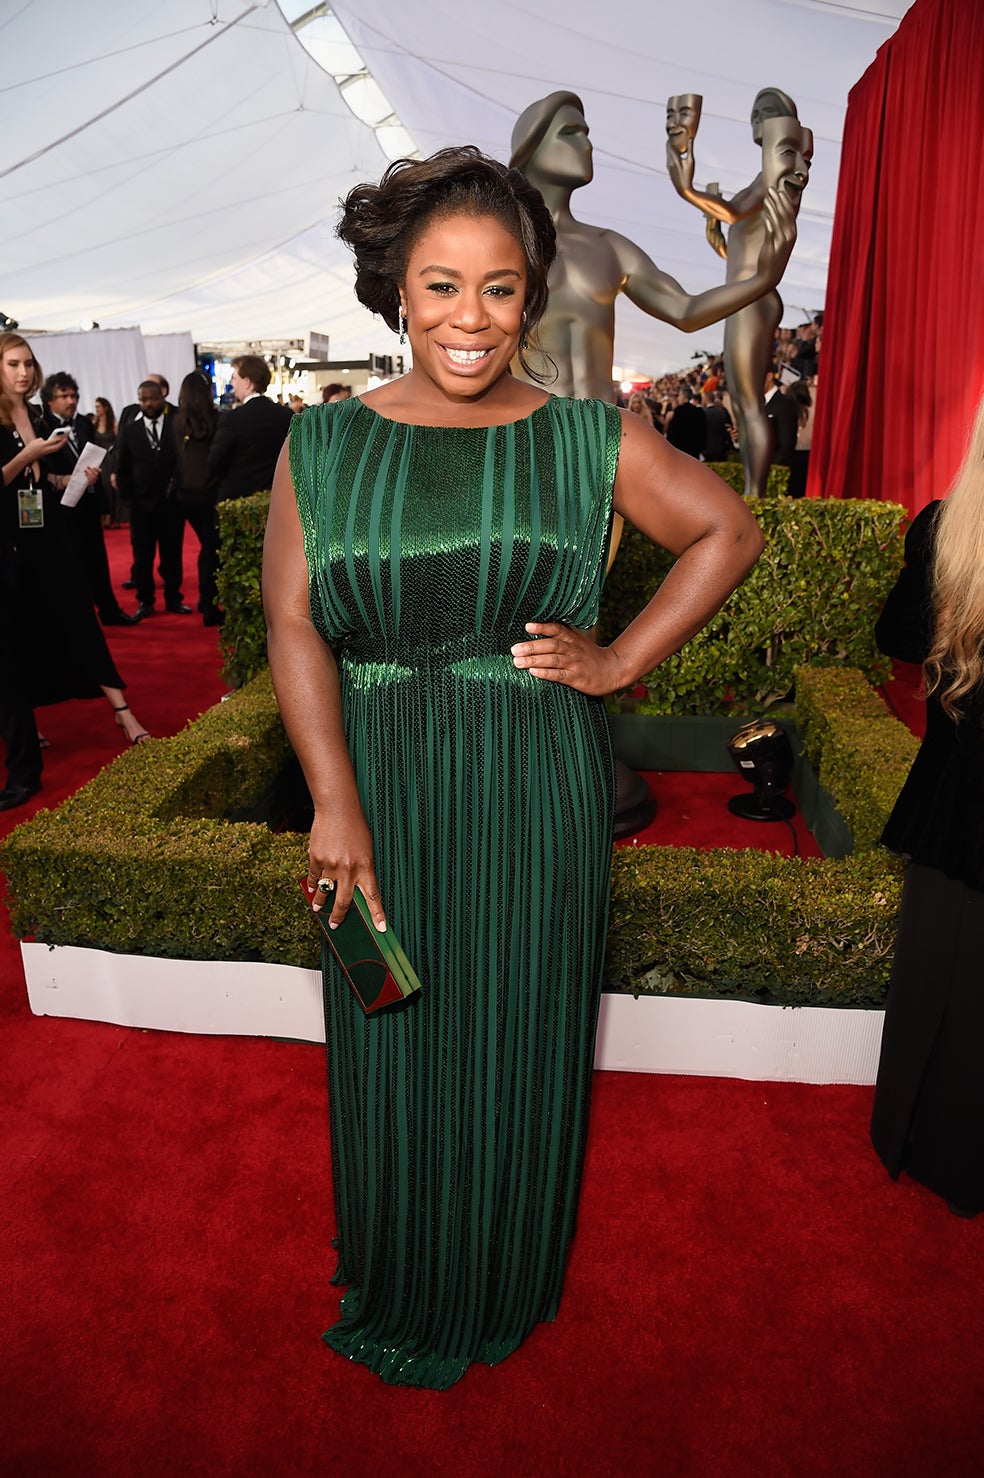 Celebs On The Red Carpet at the 2016 SAG Awards
